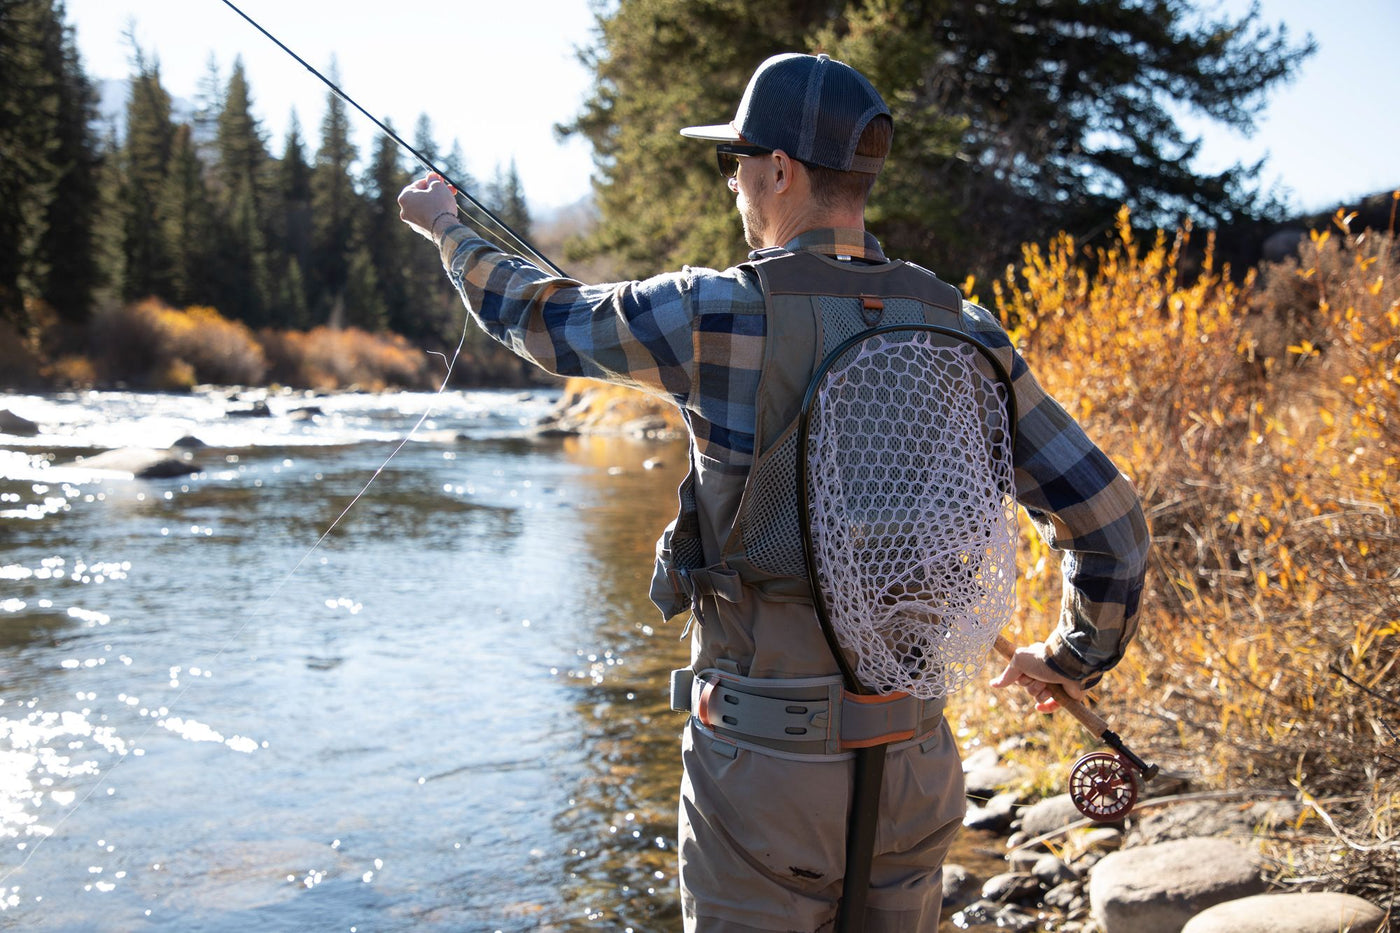 How to Attach a Trout Net to a Fly Fishing Vest